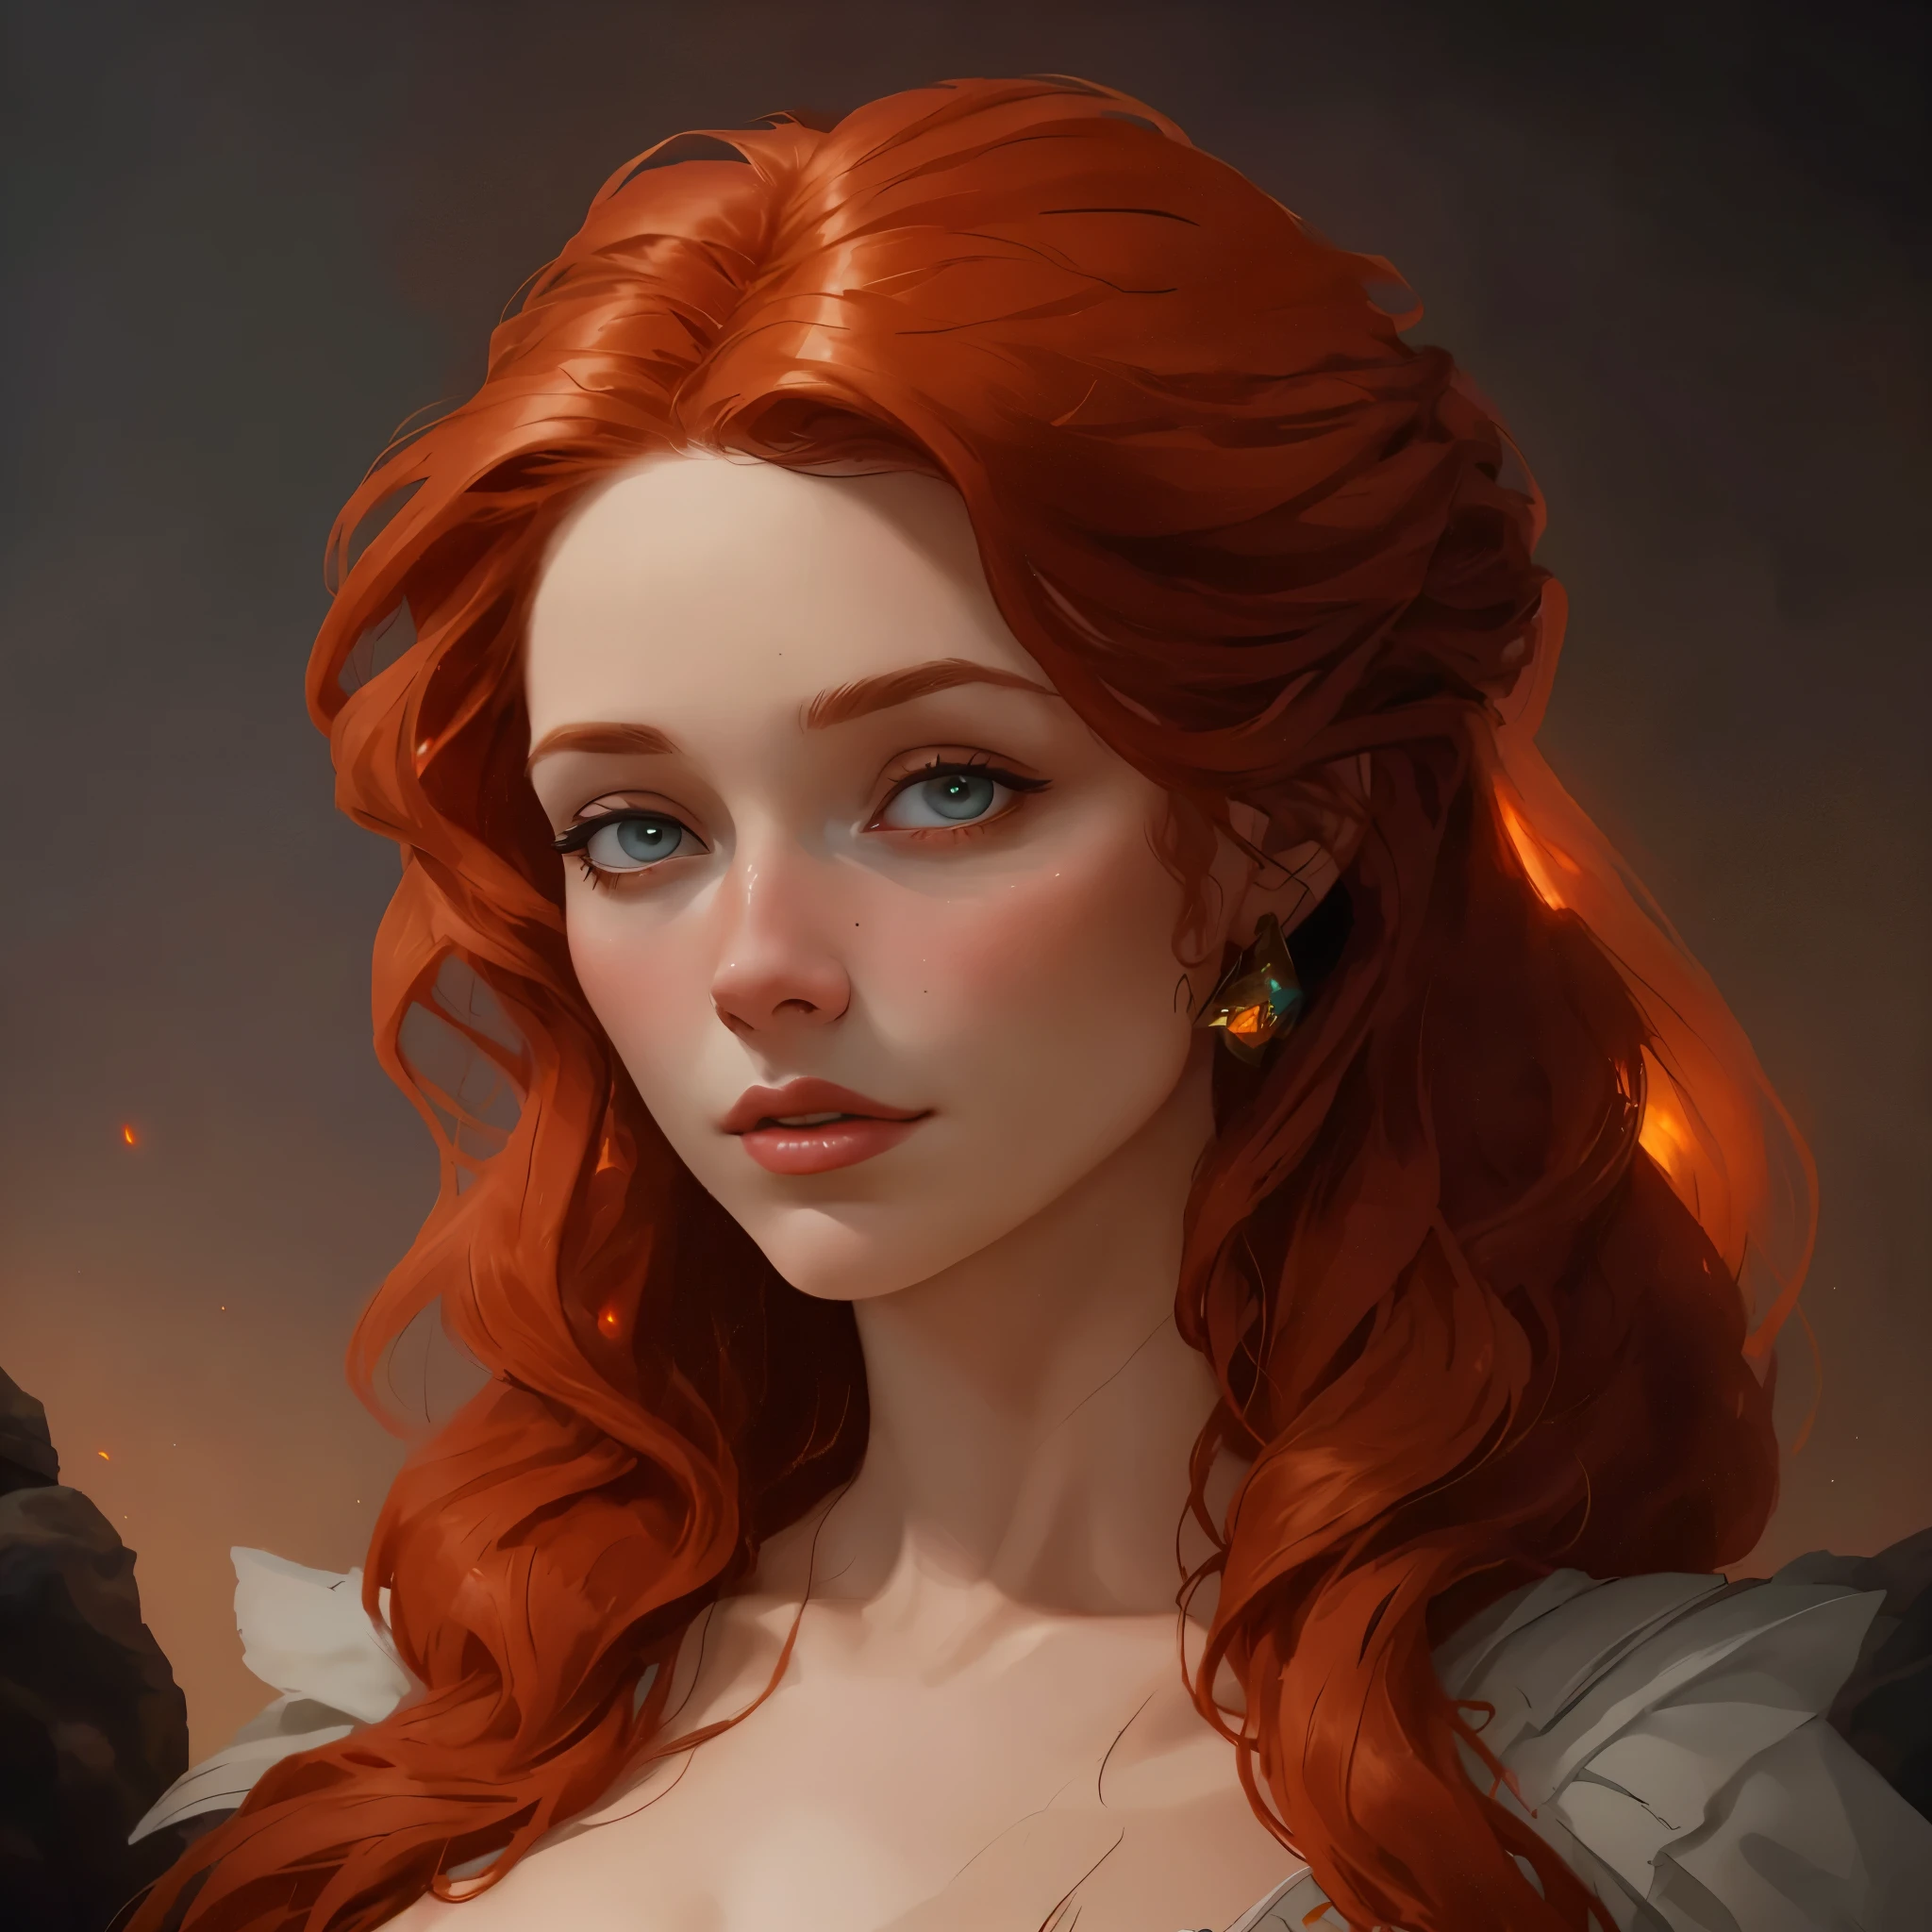 There is a woman with red hair, twilight, light on the face from below from the fire, like the glow of a fire, a decisive look to the left, fantasy concept art portrait, fantasy art portrait, fantasy portrait art, fantasy character portrait, epic fantasy art portrait, fantasy portrait, beautiful character painting, fantasy portrait, beautiful fantasy art portrait, Fantasy genre portrait, inspired by Magali Villeneuve, maiden with copper hair, alexandra fomina artstation